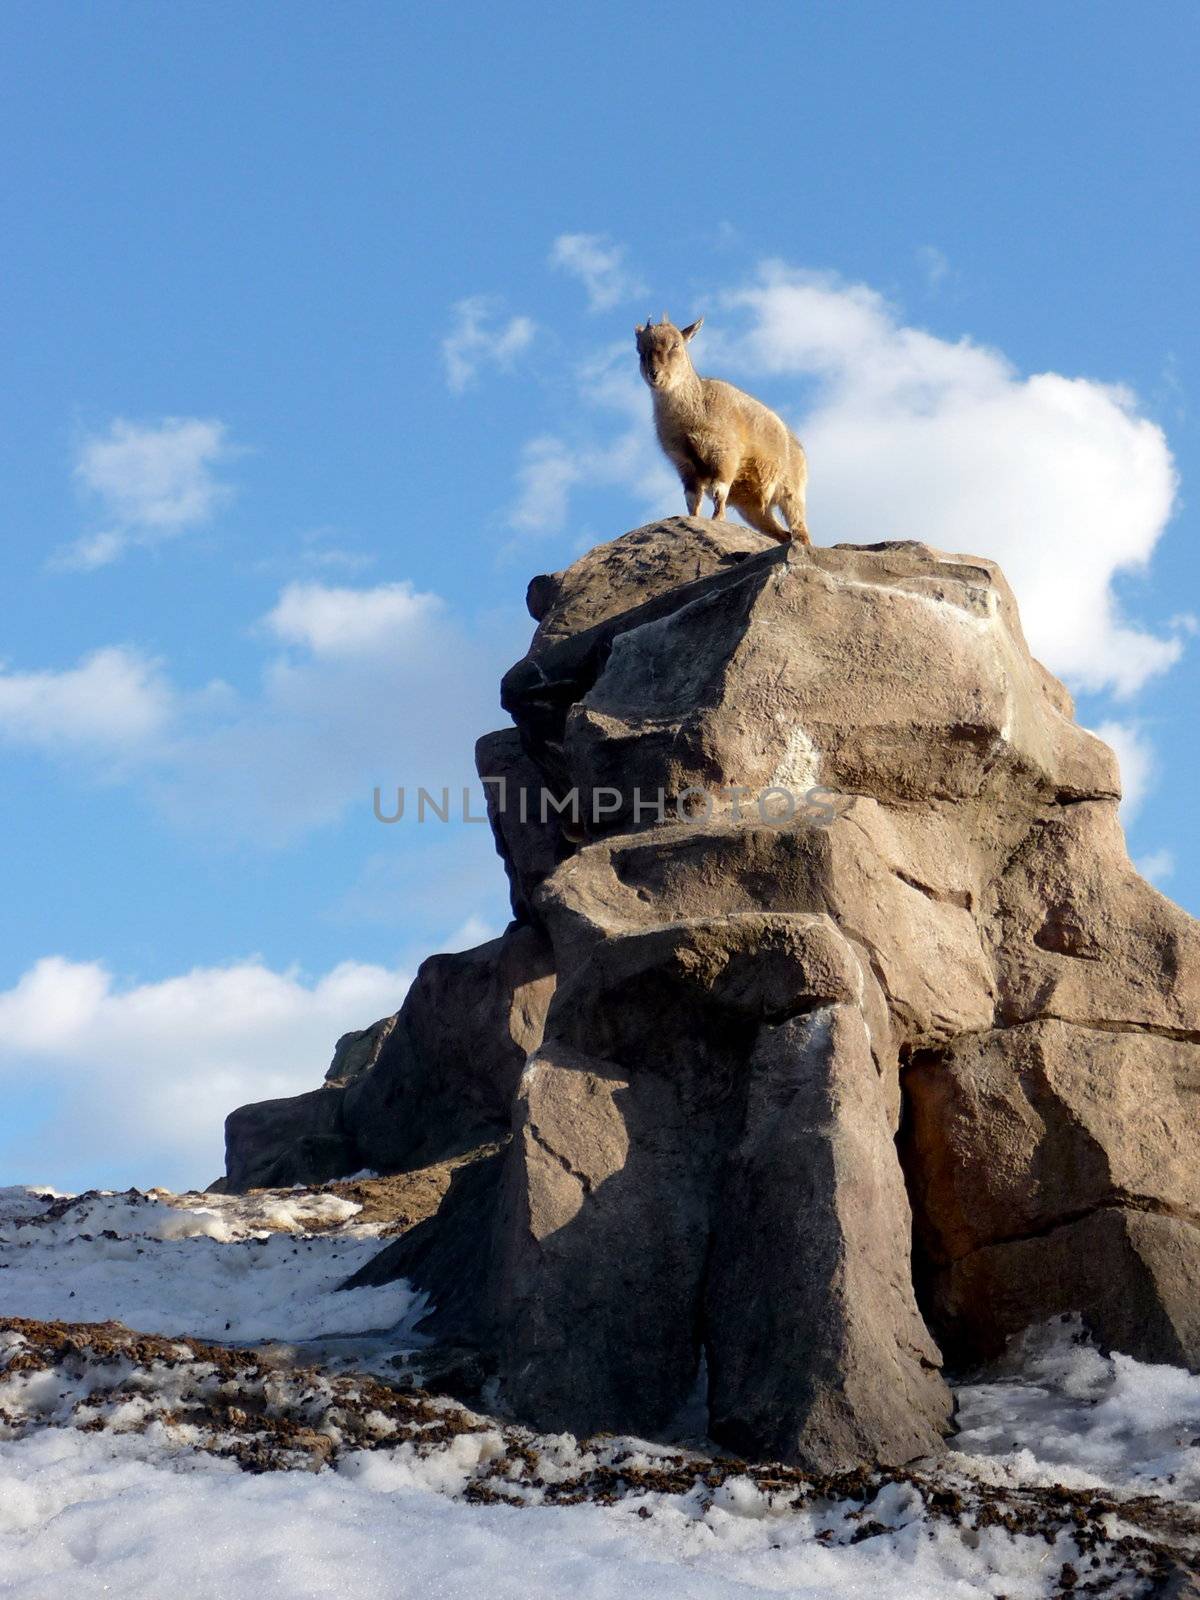 Goat kid on rock by tomatto